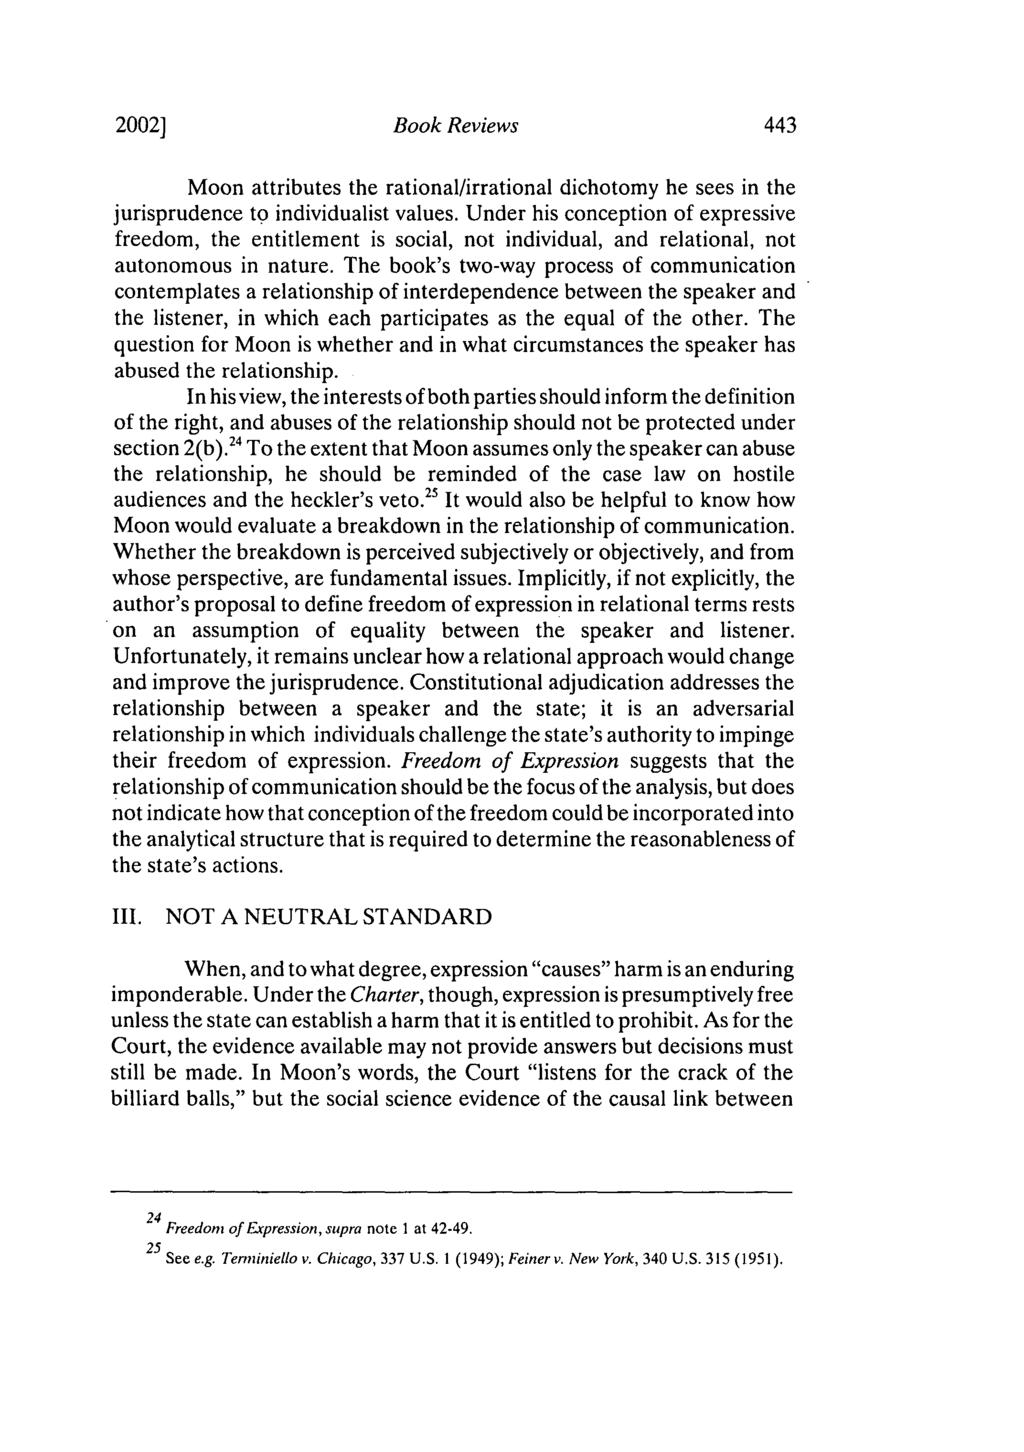 2002] Book Reviews Moon attributes the rational/irrational dichotomy he sees in the jurisprudence to individualist values.